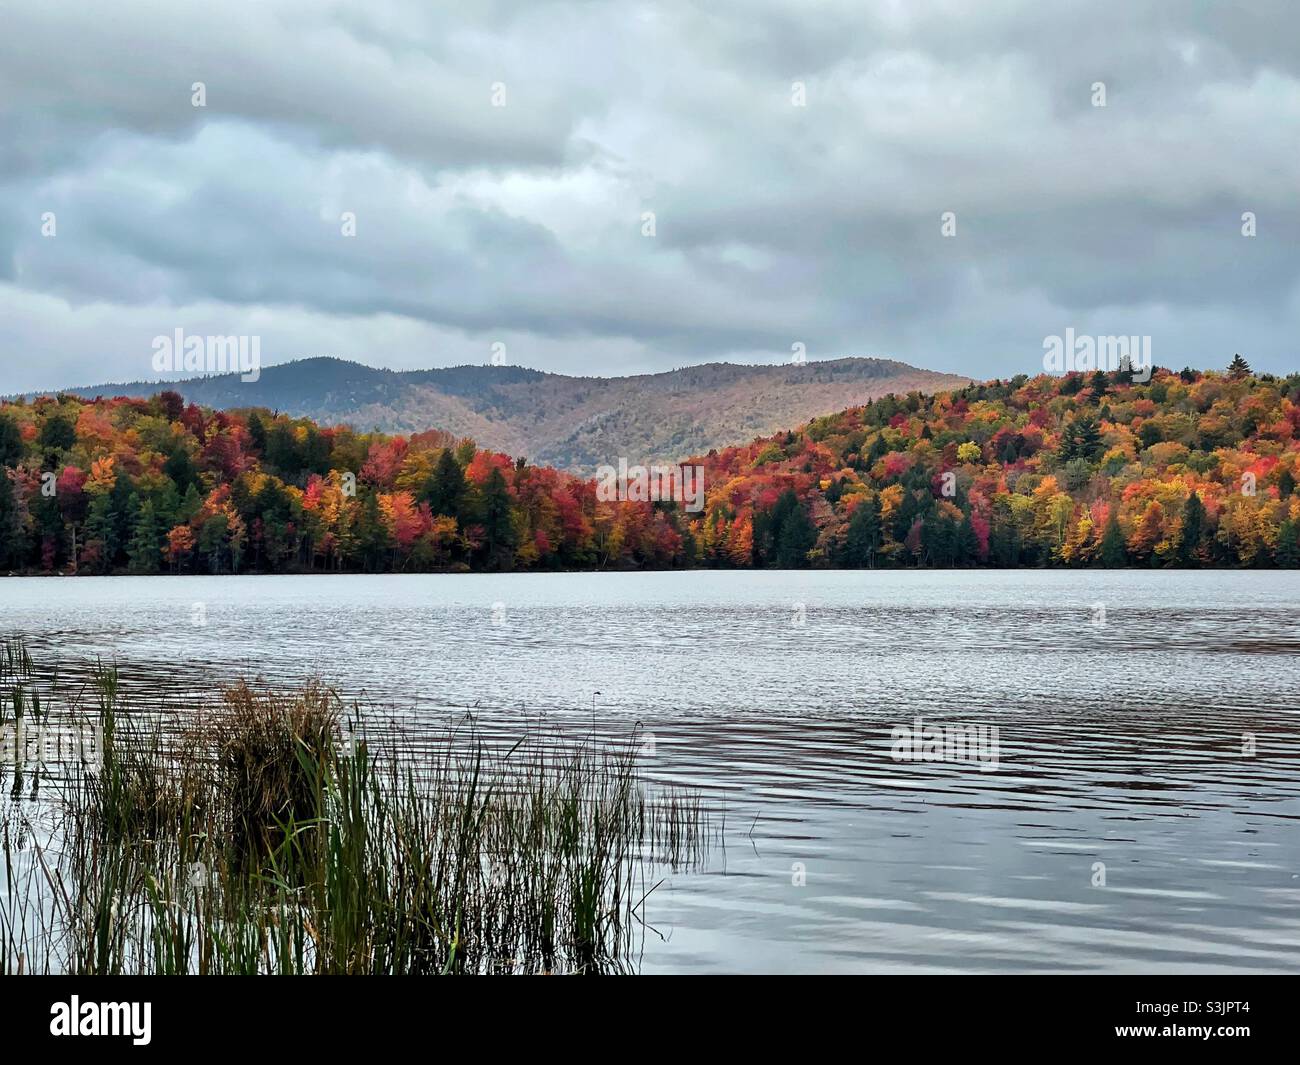 Fall foliage hits peak color along a lake in central Vermont. Stock Photo